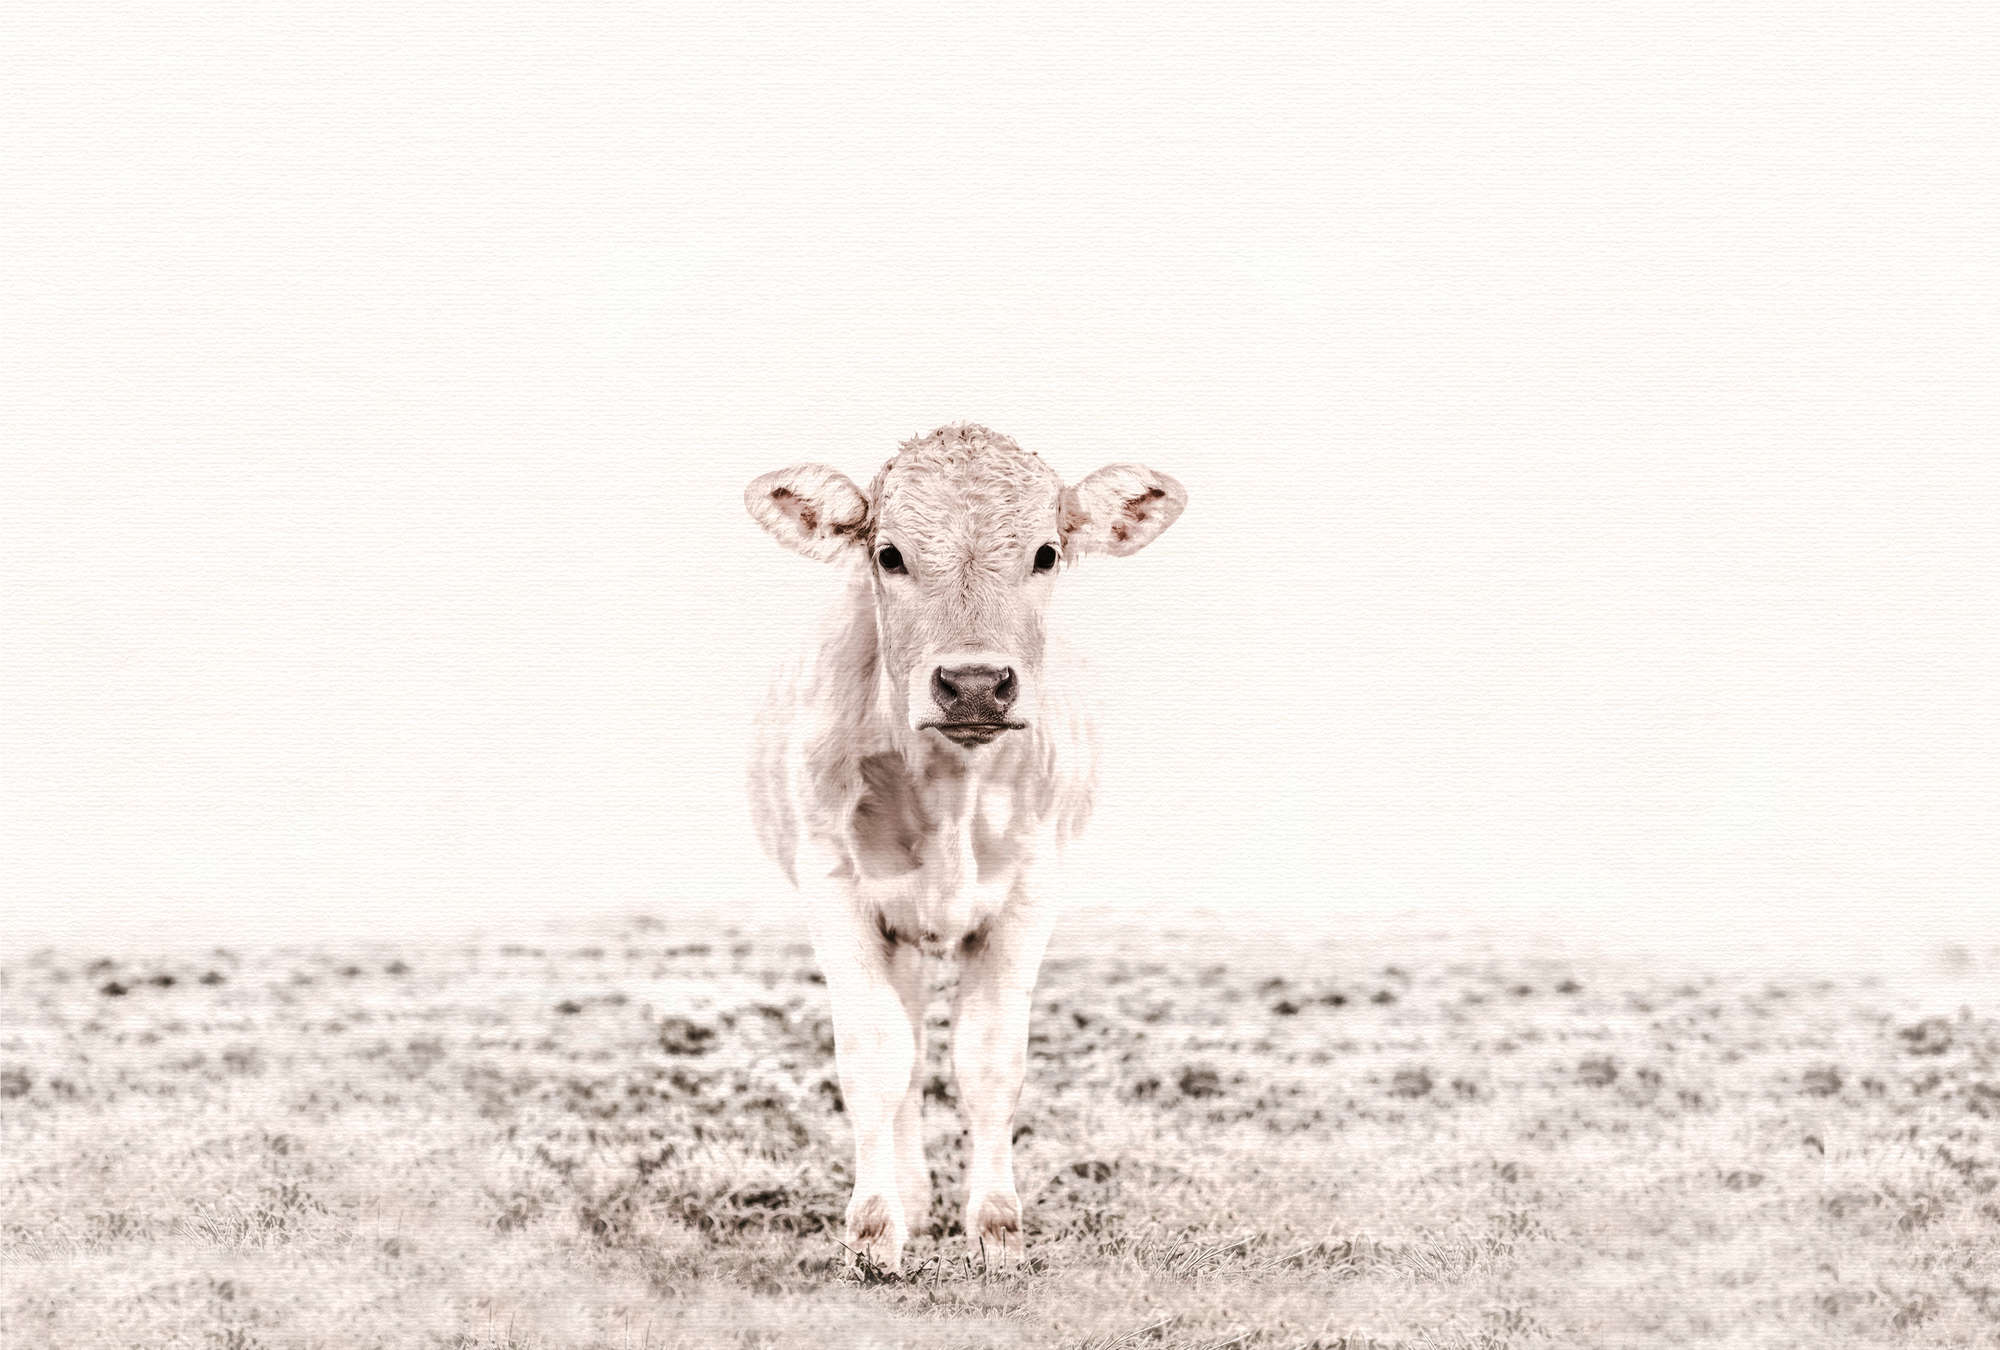             Photo wallpaper cow & meadow in black and white design
        